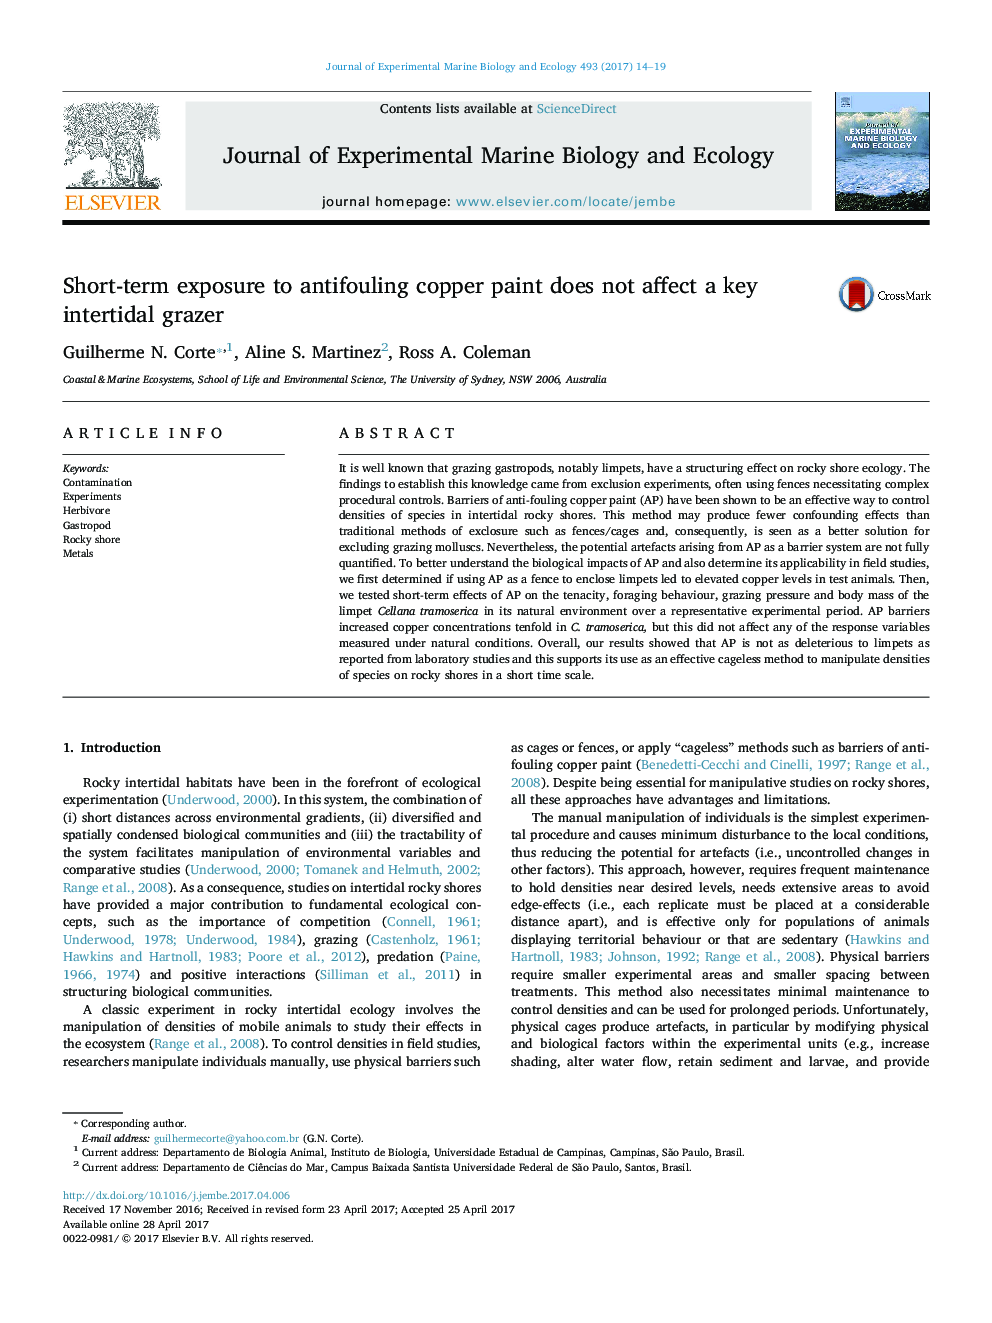 Short-term exposure to antifouling copper paint does not affect a key intertidal grazer